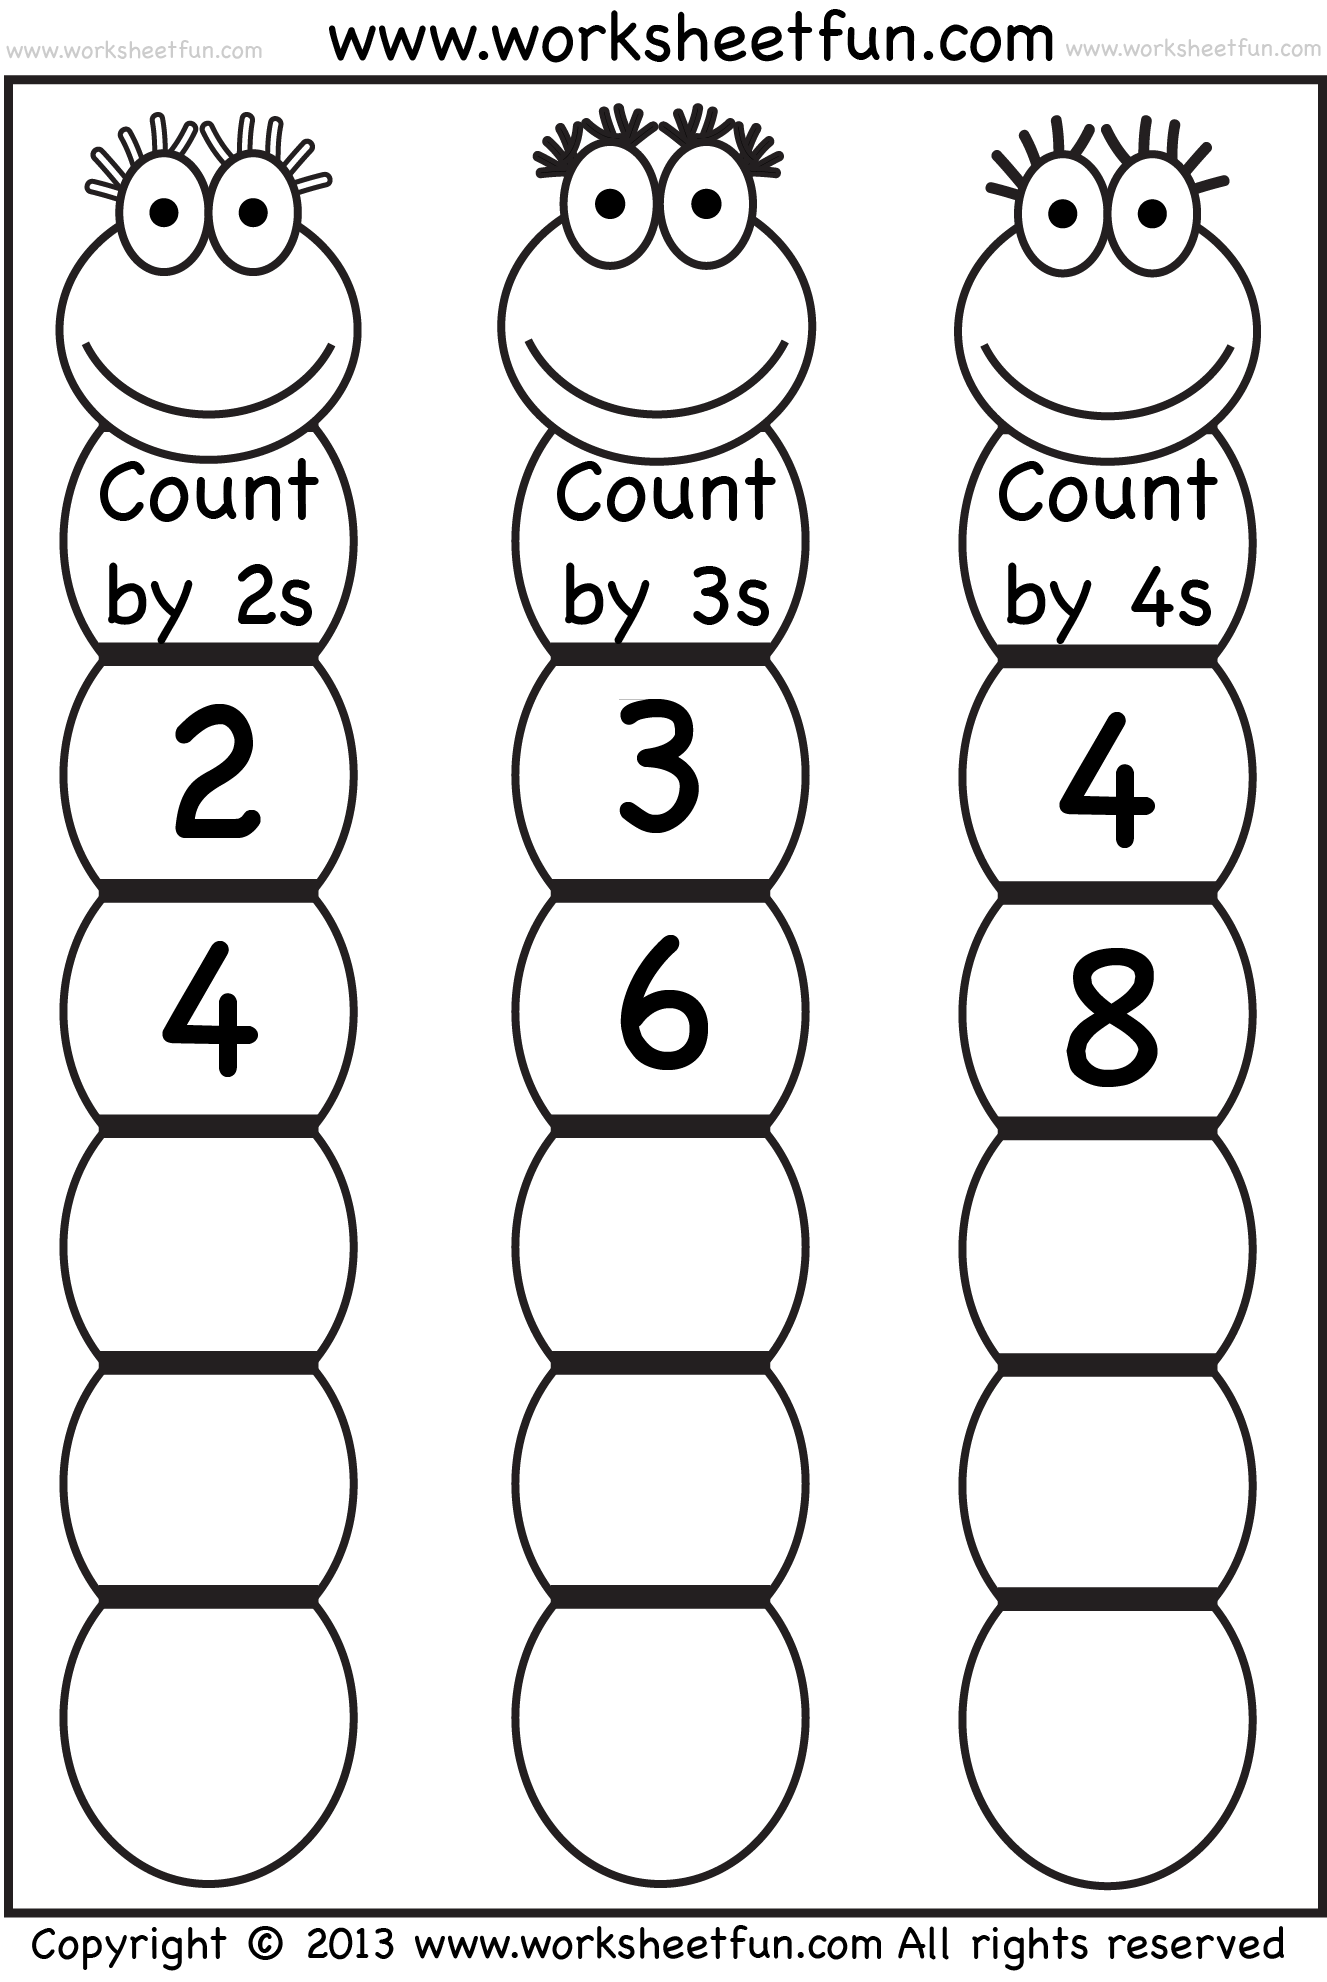 counting-by-10s-worksheet-for-kindergarten